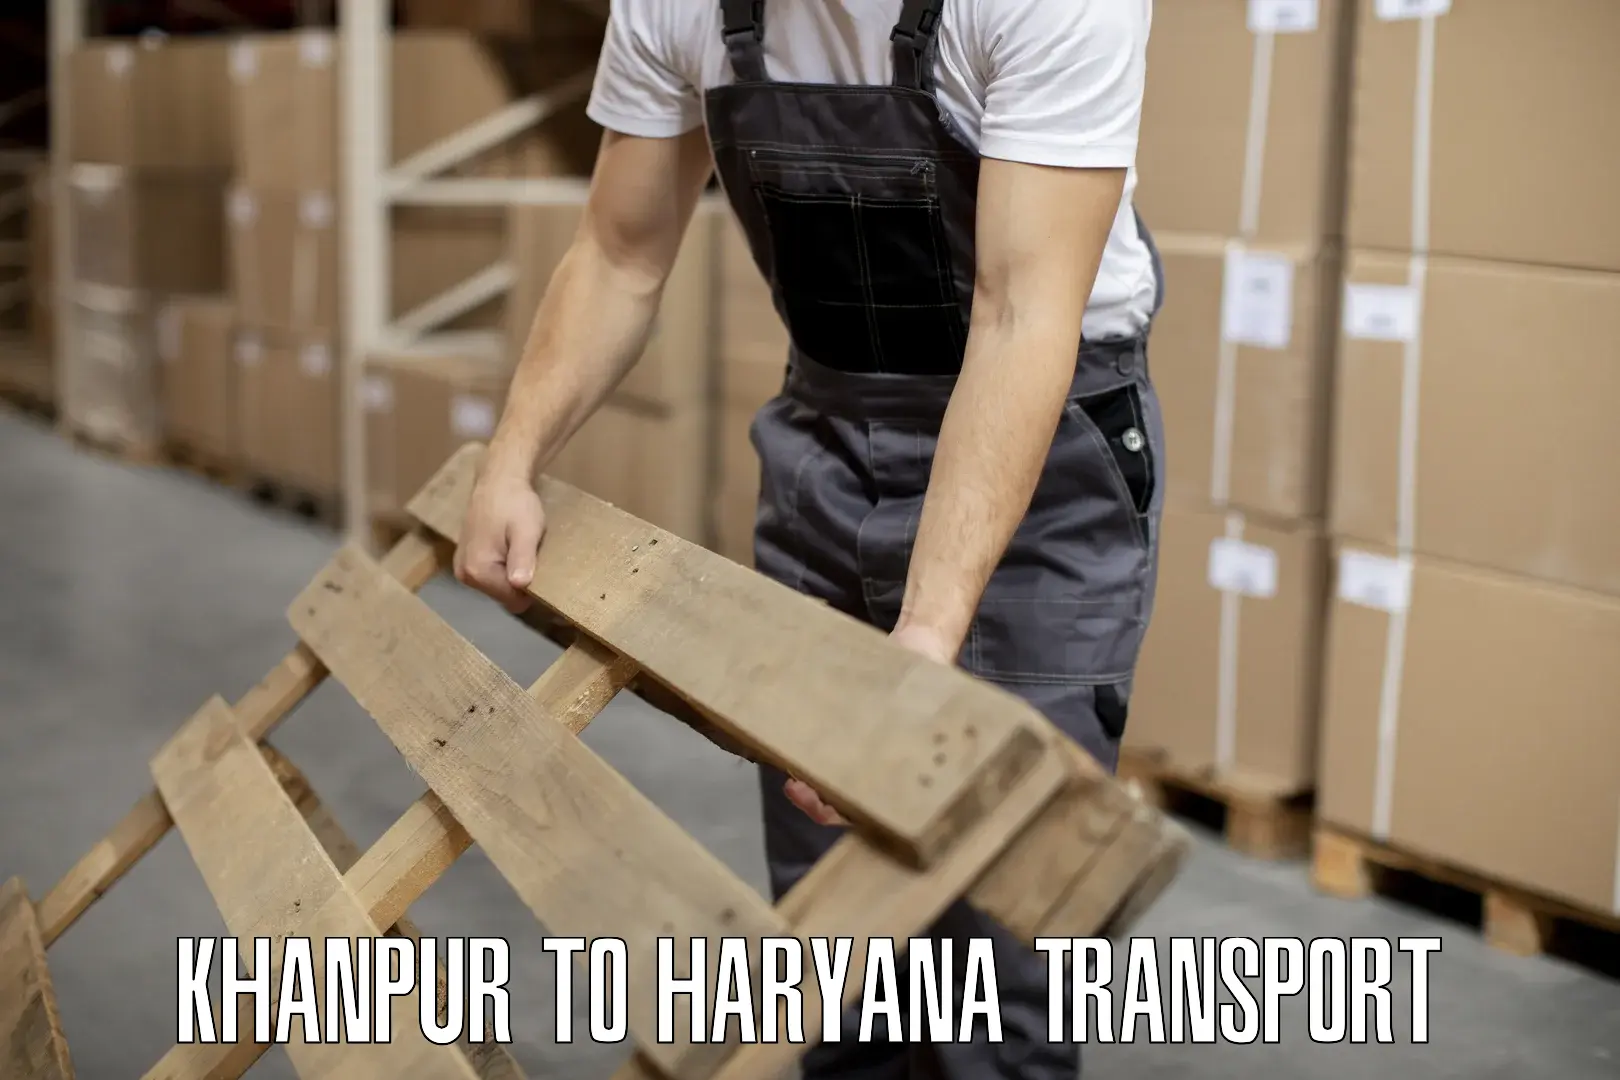 Part load transport service in India Khanpur to IIIT Sonepat